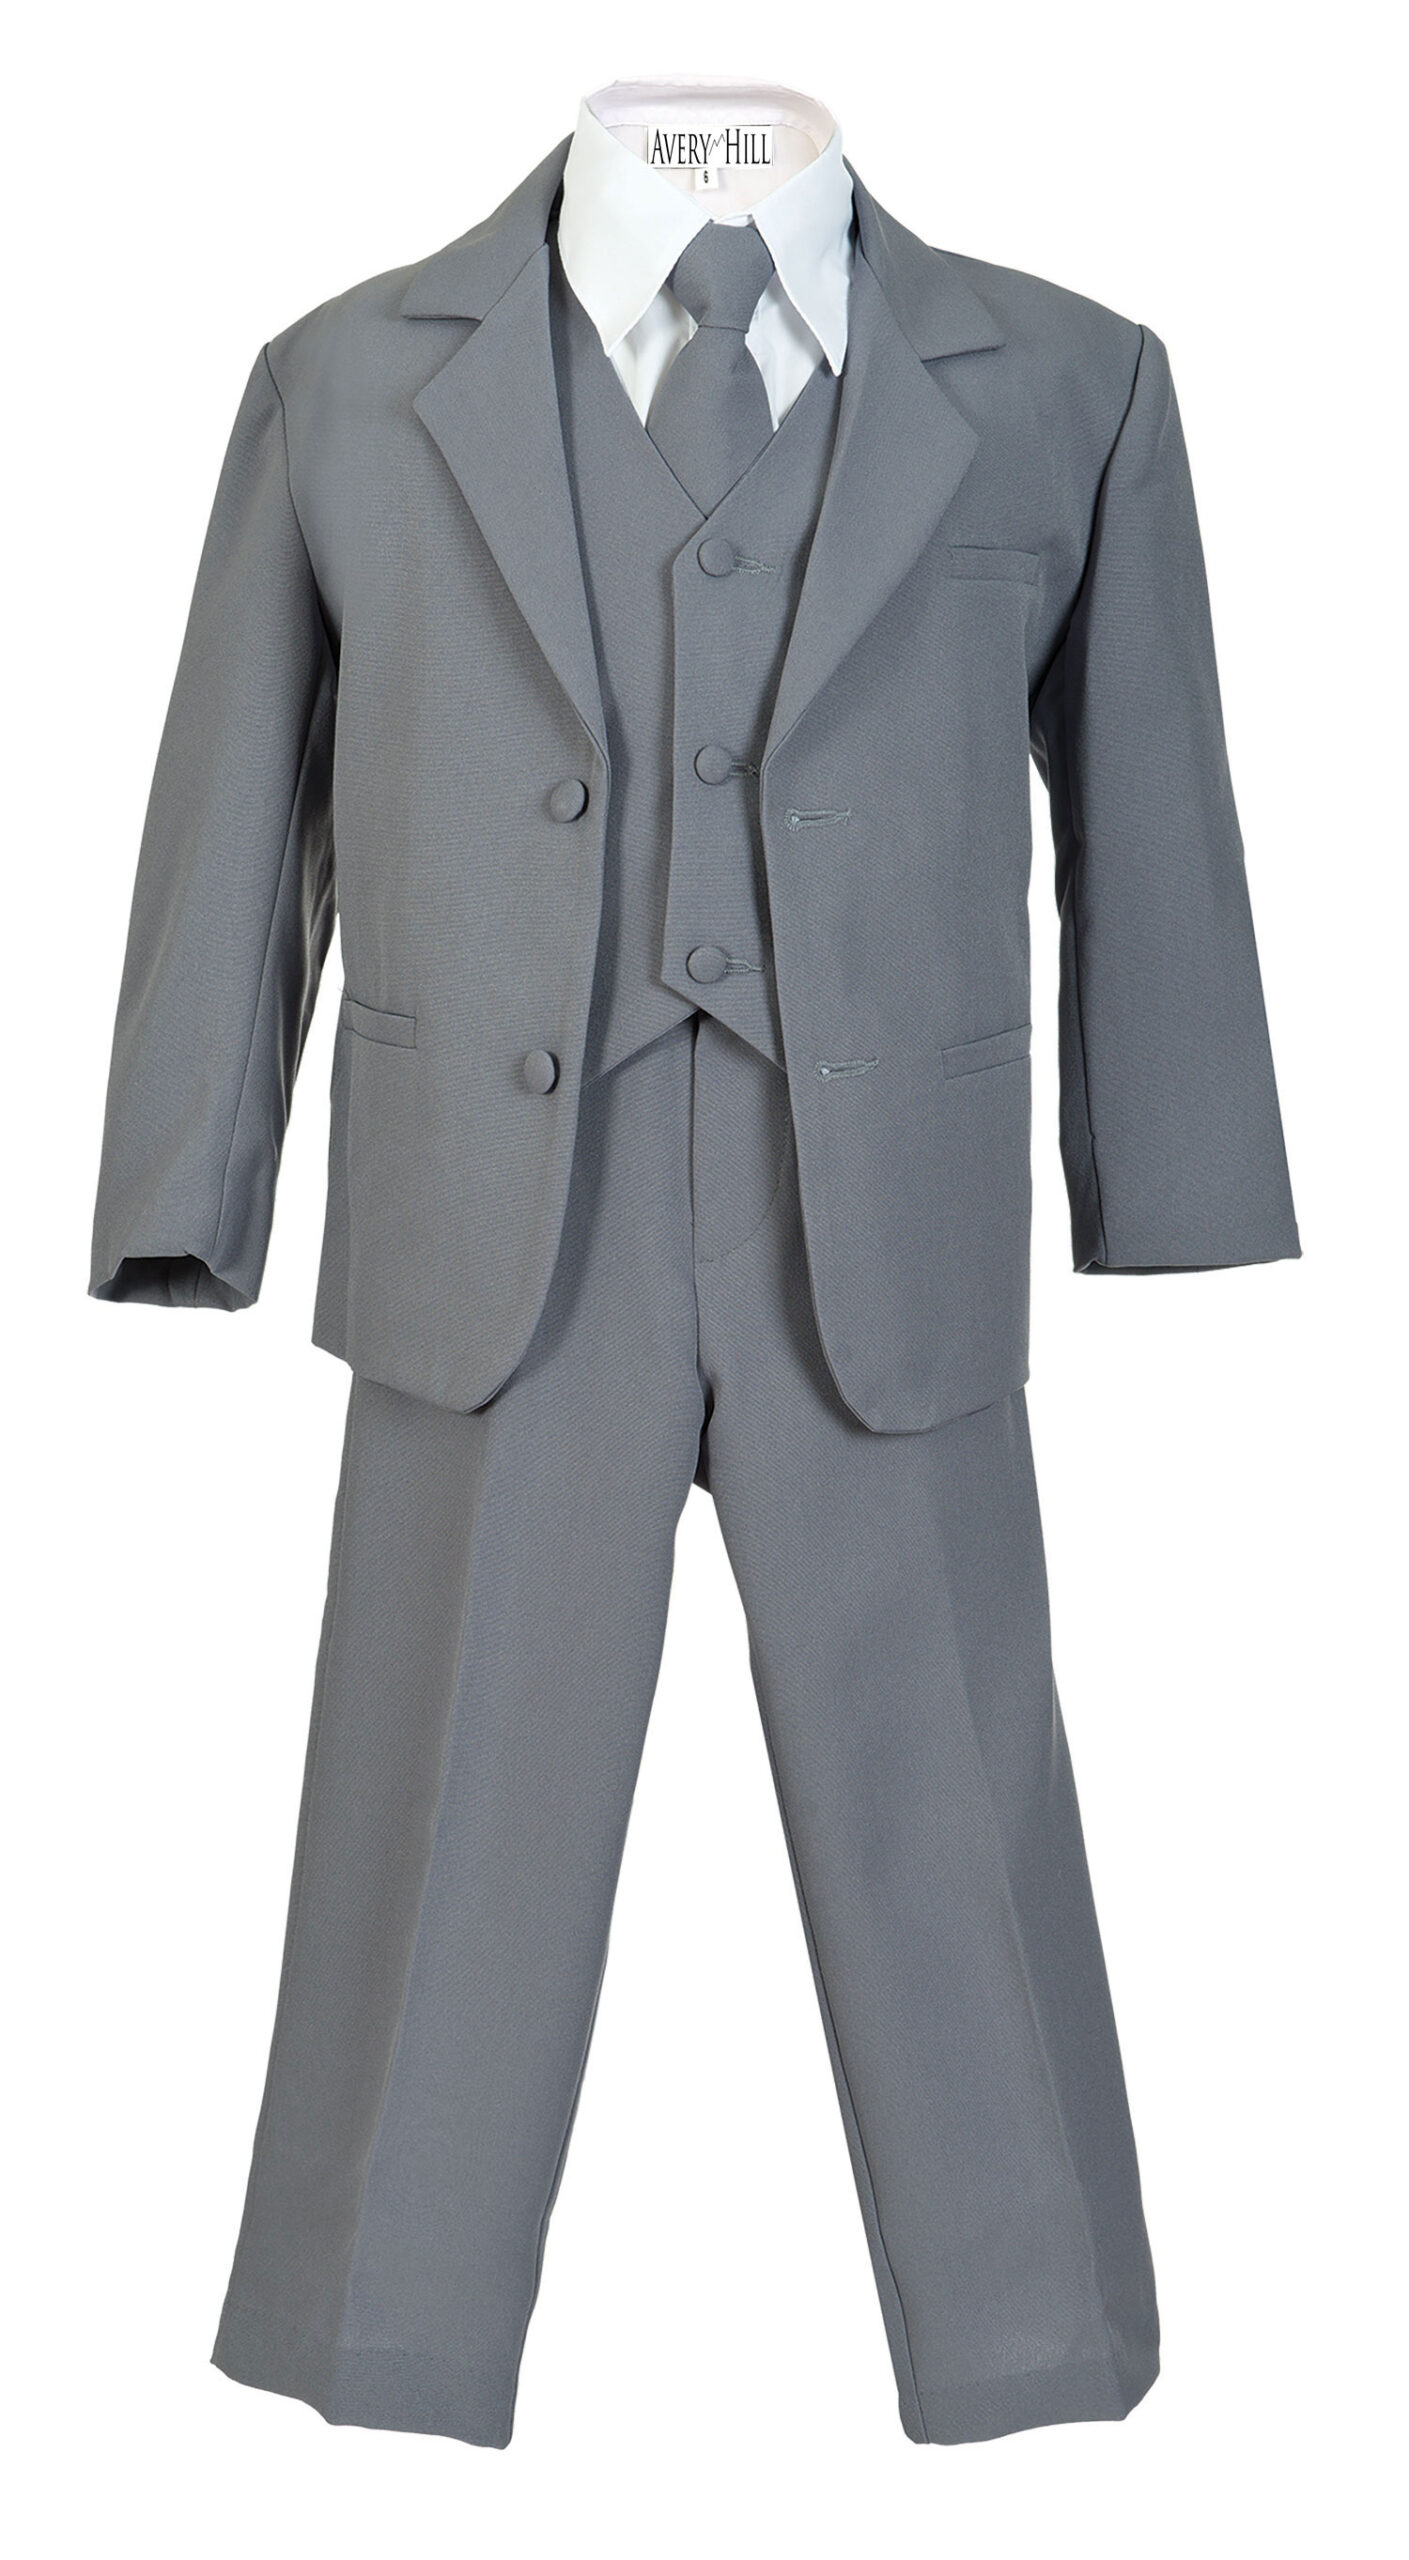 Avery Hill Boys Formal 5 Piece Suit with Shirt and Vest Slate Gray - 20